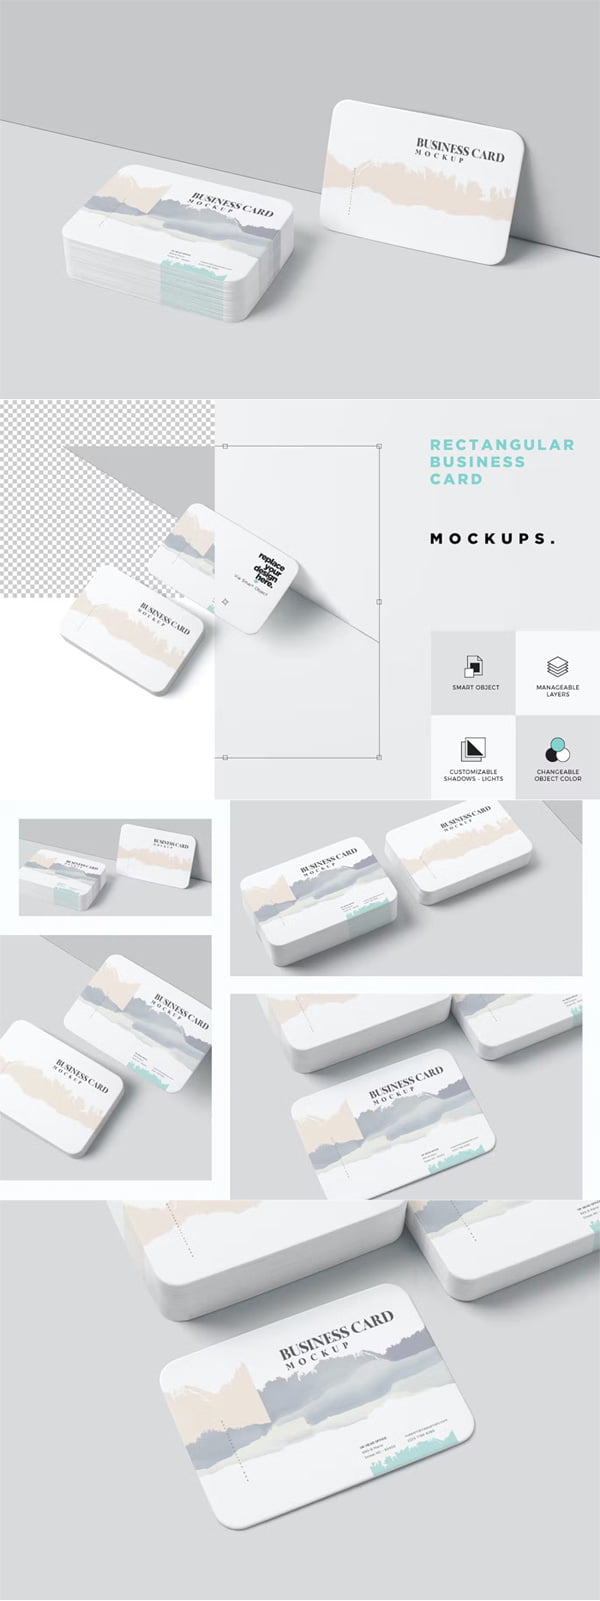 Business Card Mockups With Rounded Corners